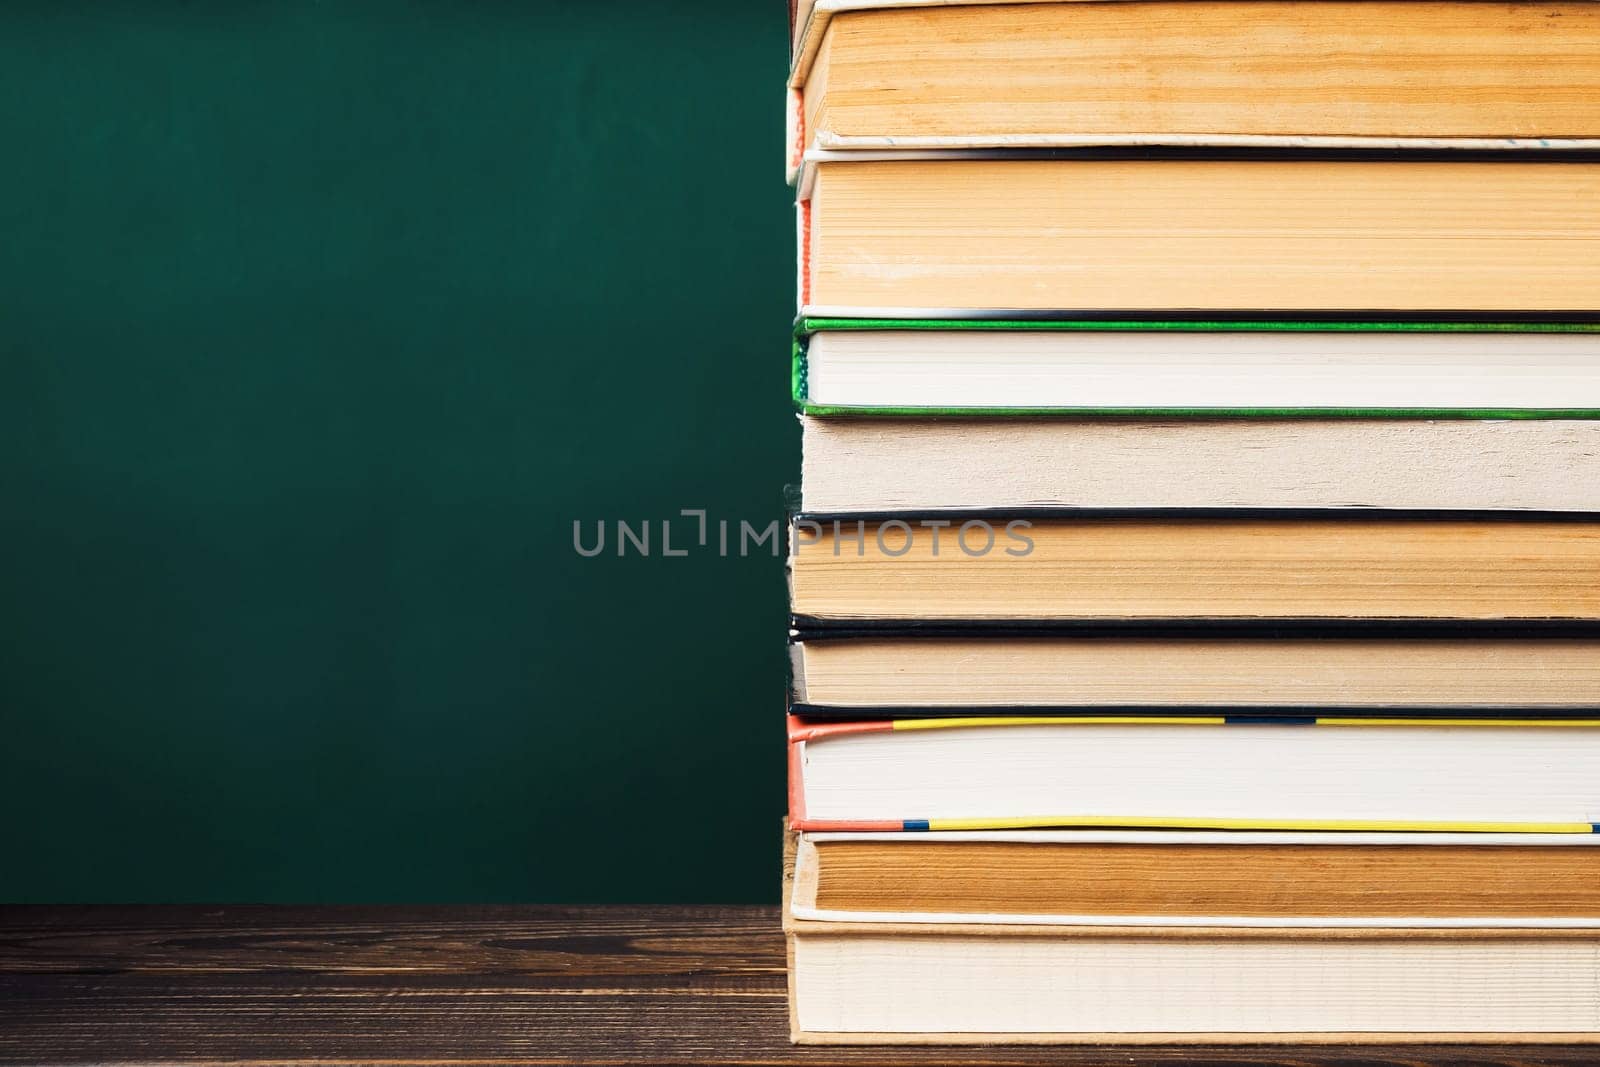 A stack of books on a table with a green background. The books are of different sizes and colors. Concept of knowledge and learning, as well as the importance of reading and education